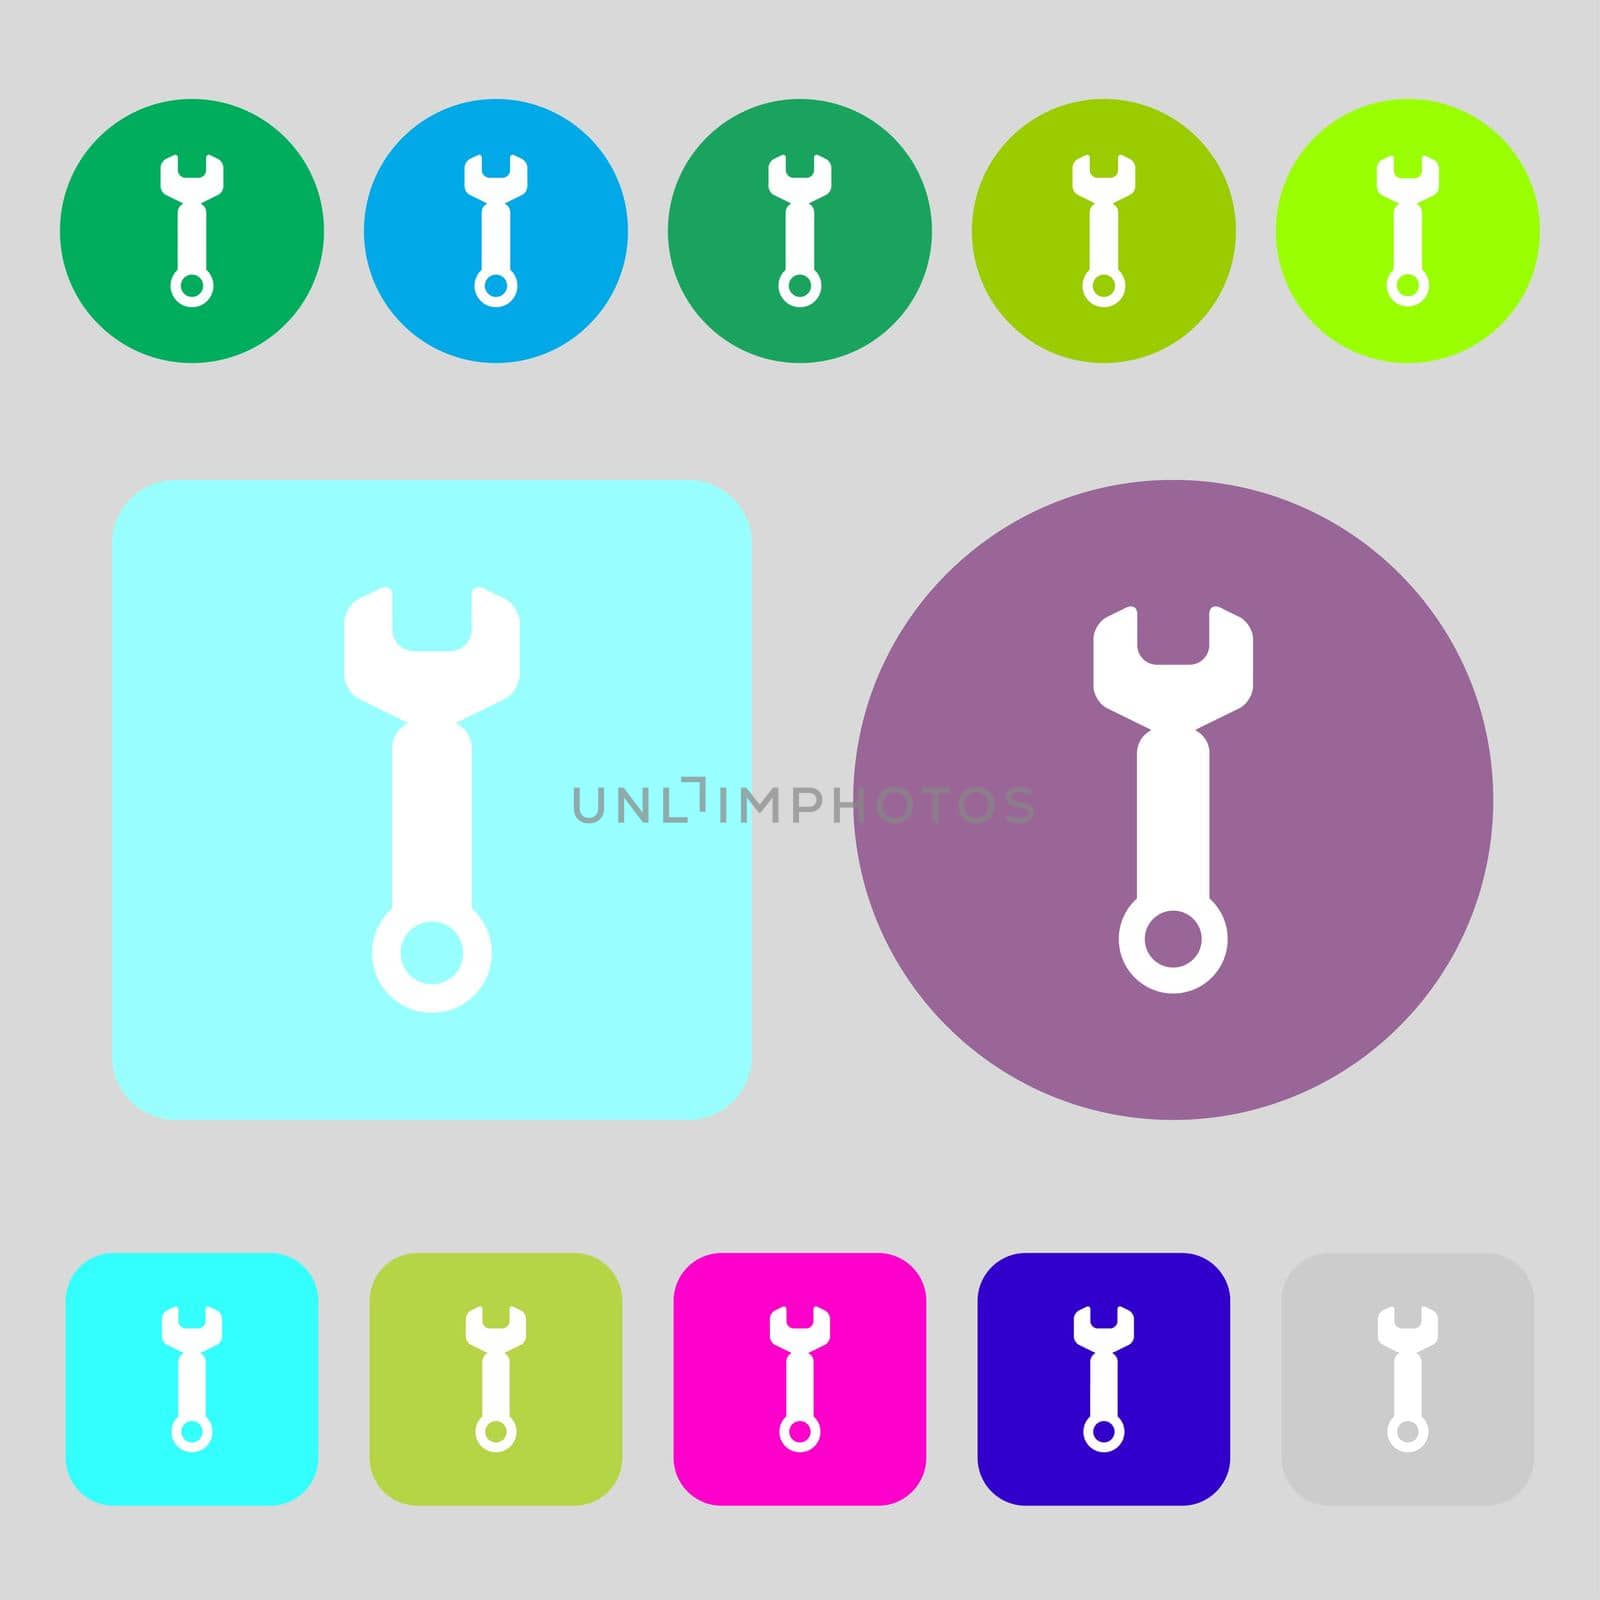 Wrench key sign icon. Service tool symbol.12 colored buttons. Flat design. illustration